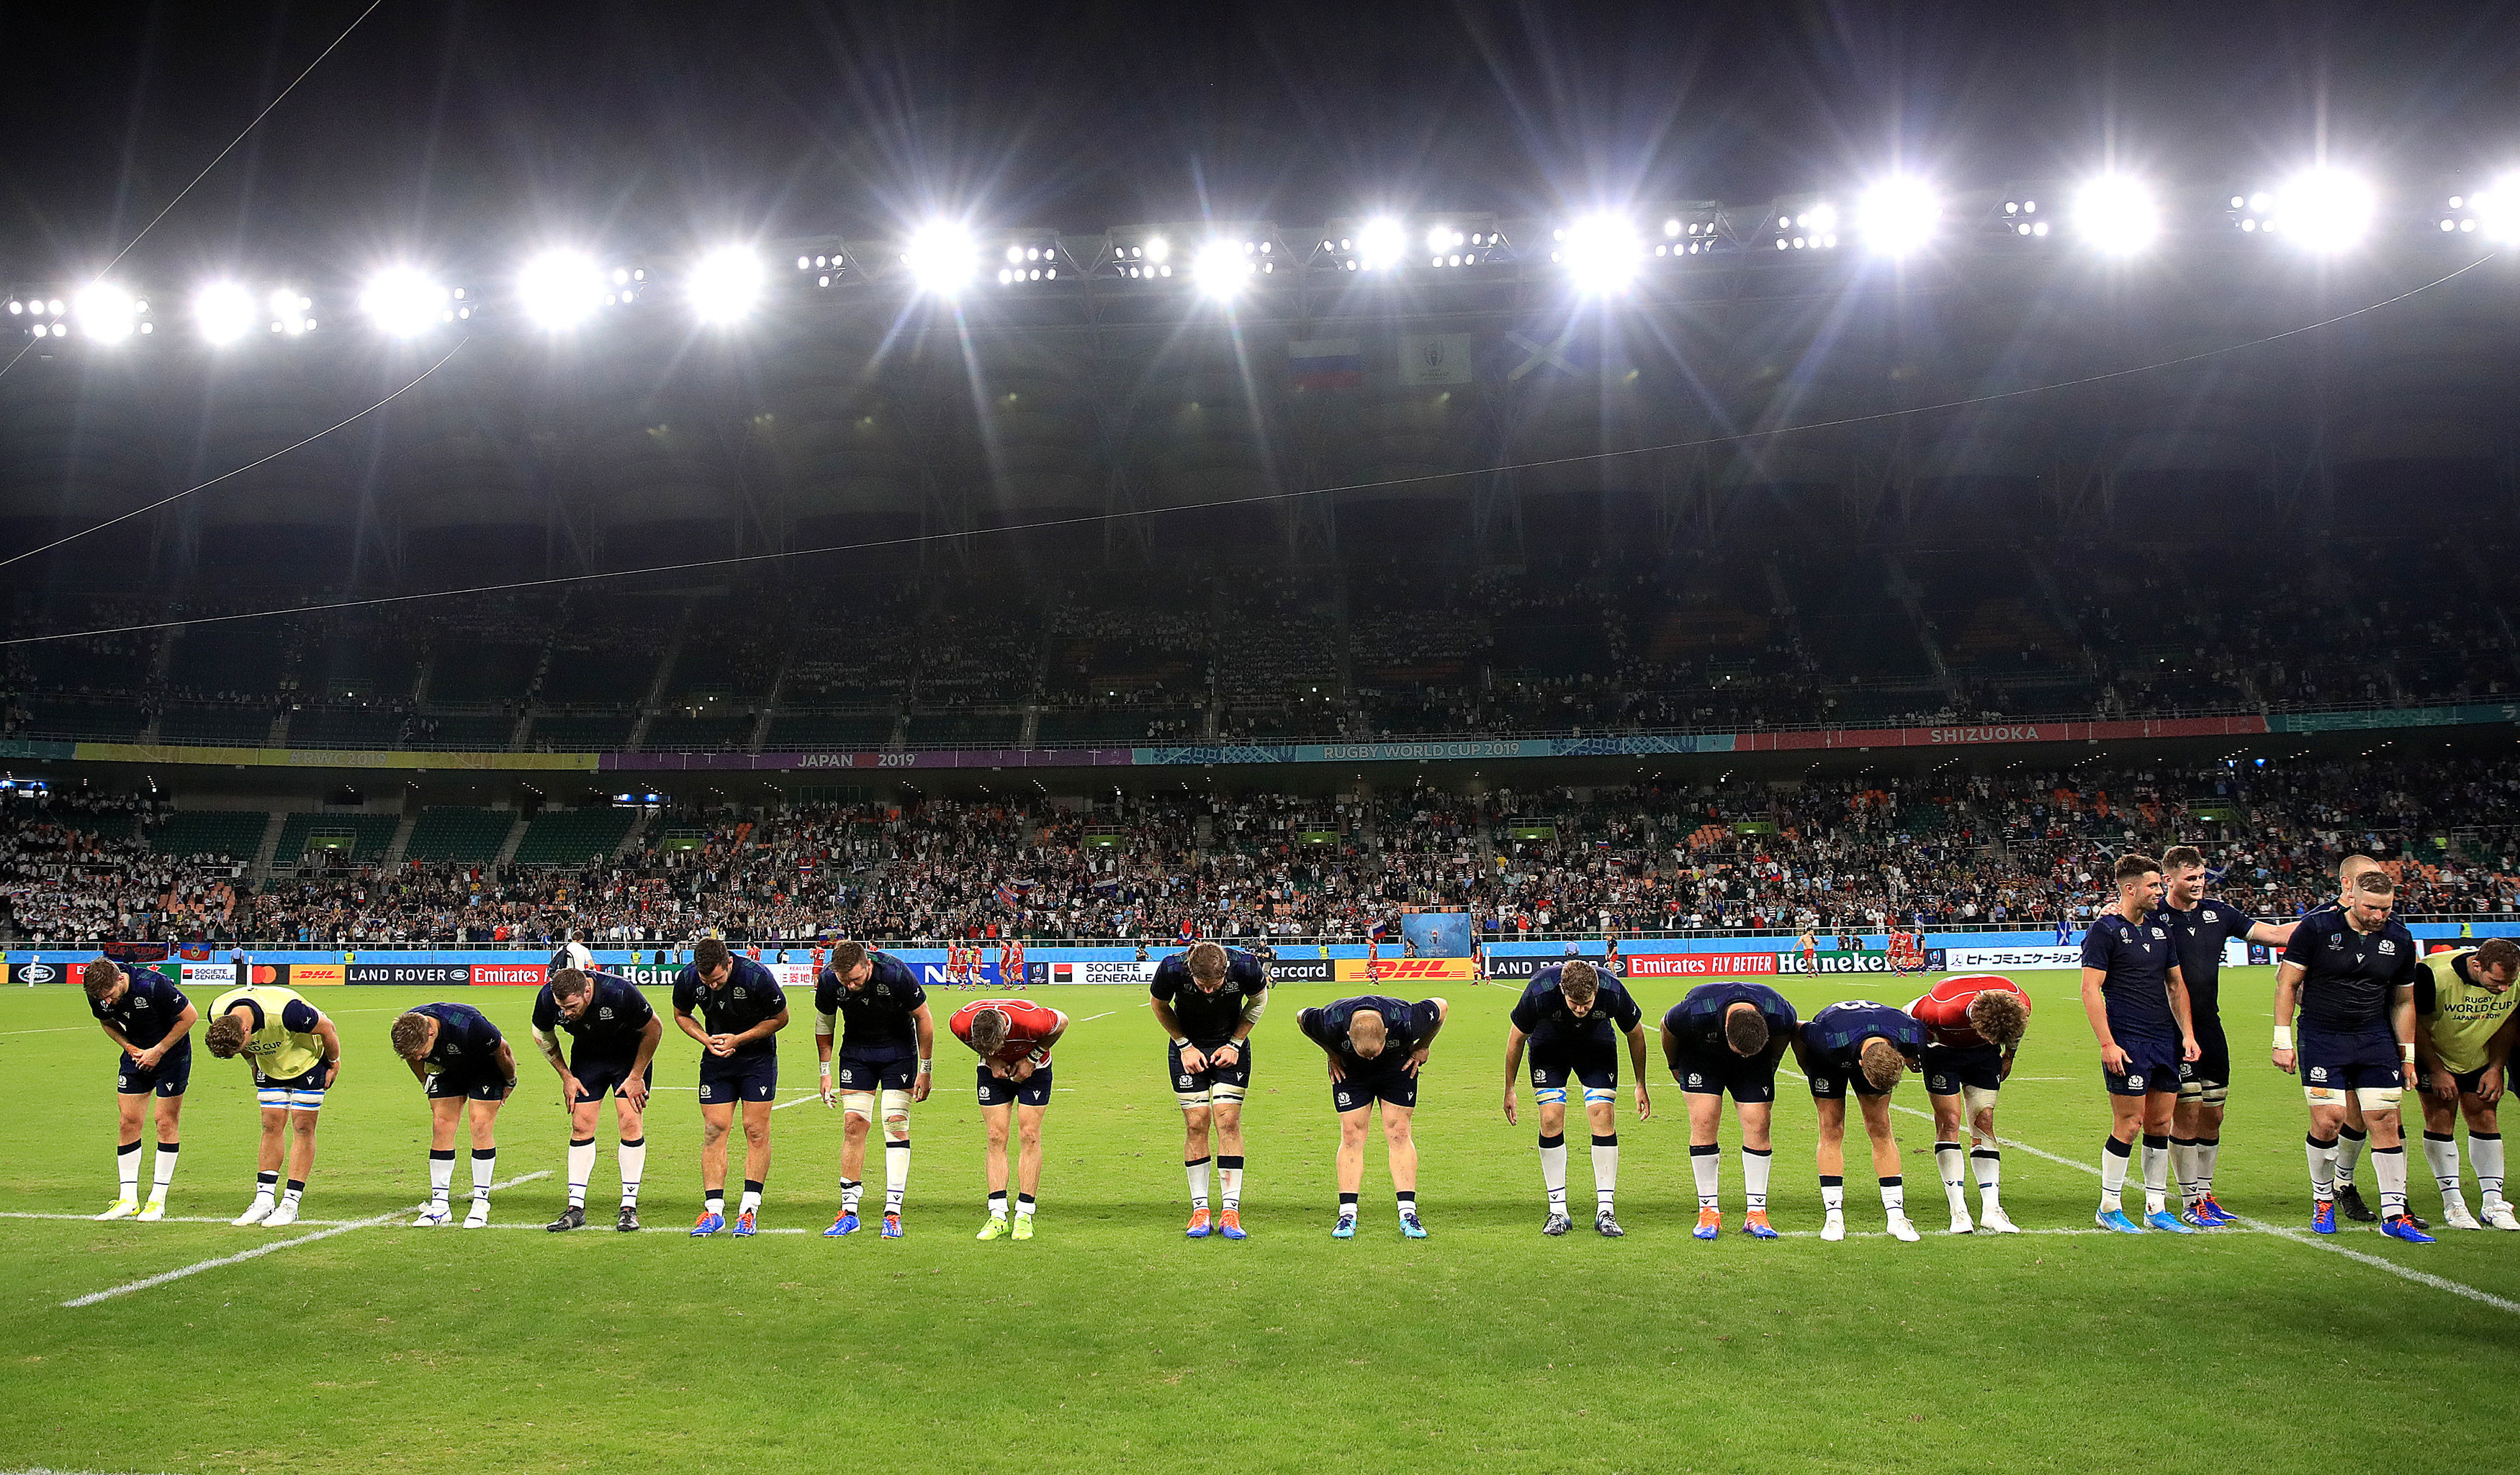 Scotland players bow to fans after the 2019 Rugby World Cup Pool A match at Shizuoka Stadium Ecopa, Shizuoka Prefecture. PA Photo. Picture date: Wednesday October 9, 2019. See PA story RUGBYU Scotland. Photo credit should read: Adam Davy/PA Wire. RESTRICTIONS: Editorial use only. Strictly no commercial use or association. Still image use only. Use implies acceptance of RWC 2019 T&Cs (in particular Section 5 of RWC 2019 T&Cs) at URL: bit.ly/2knOId6